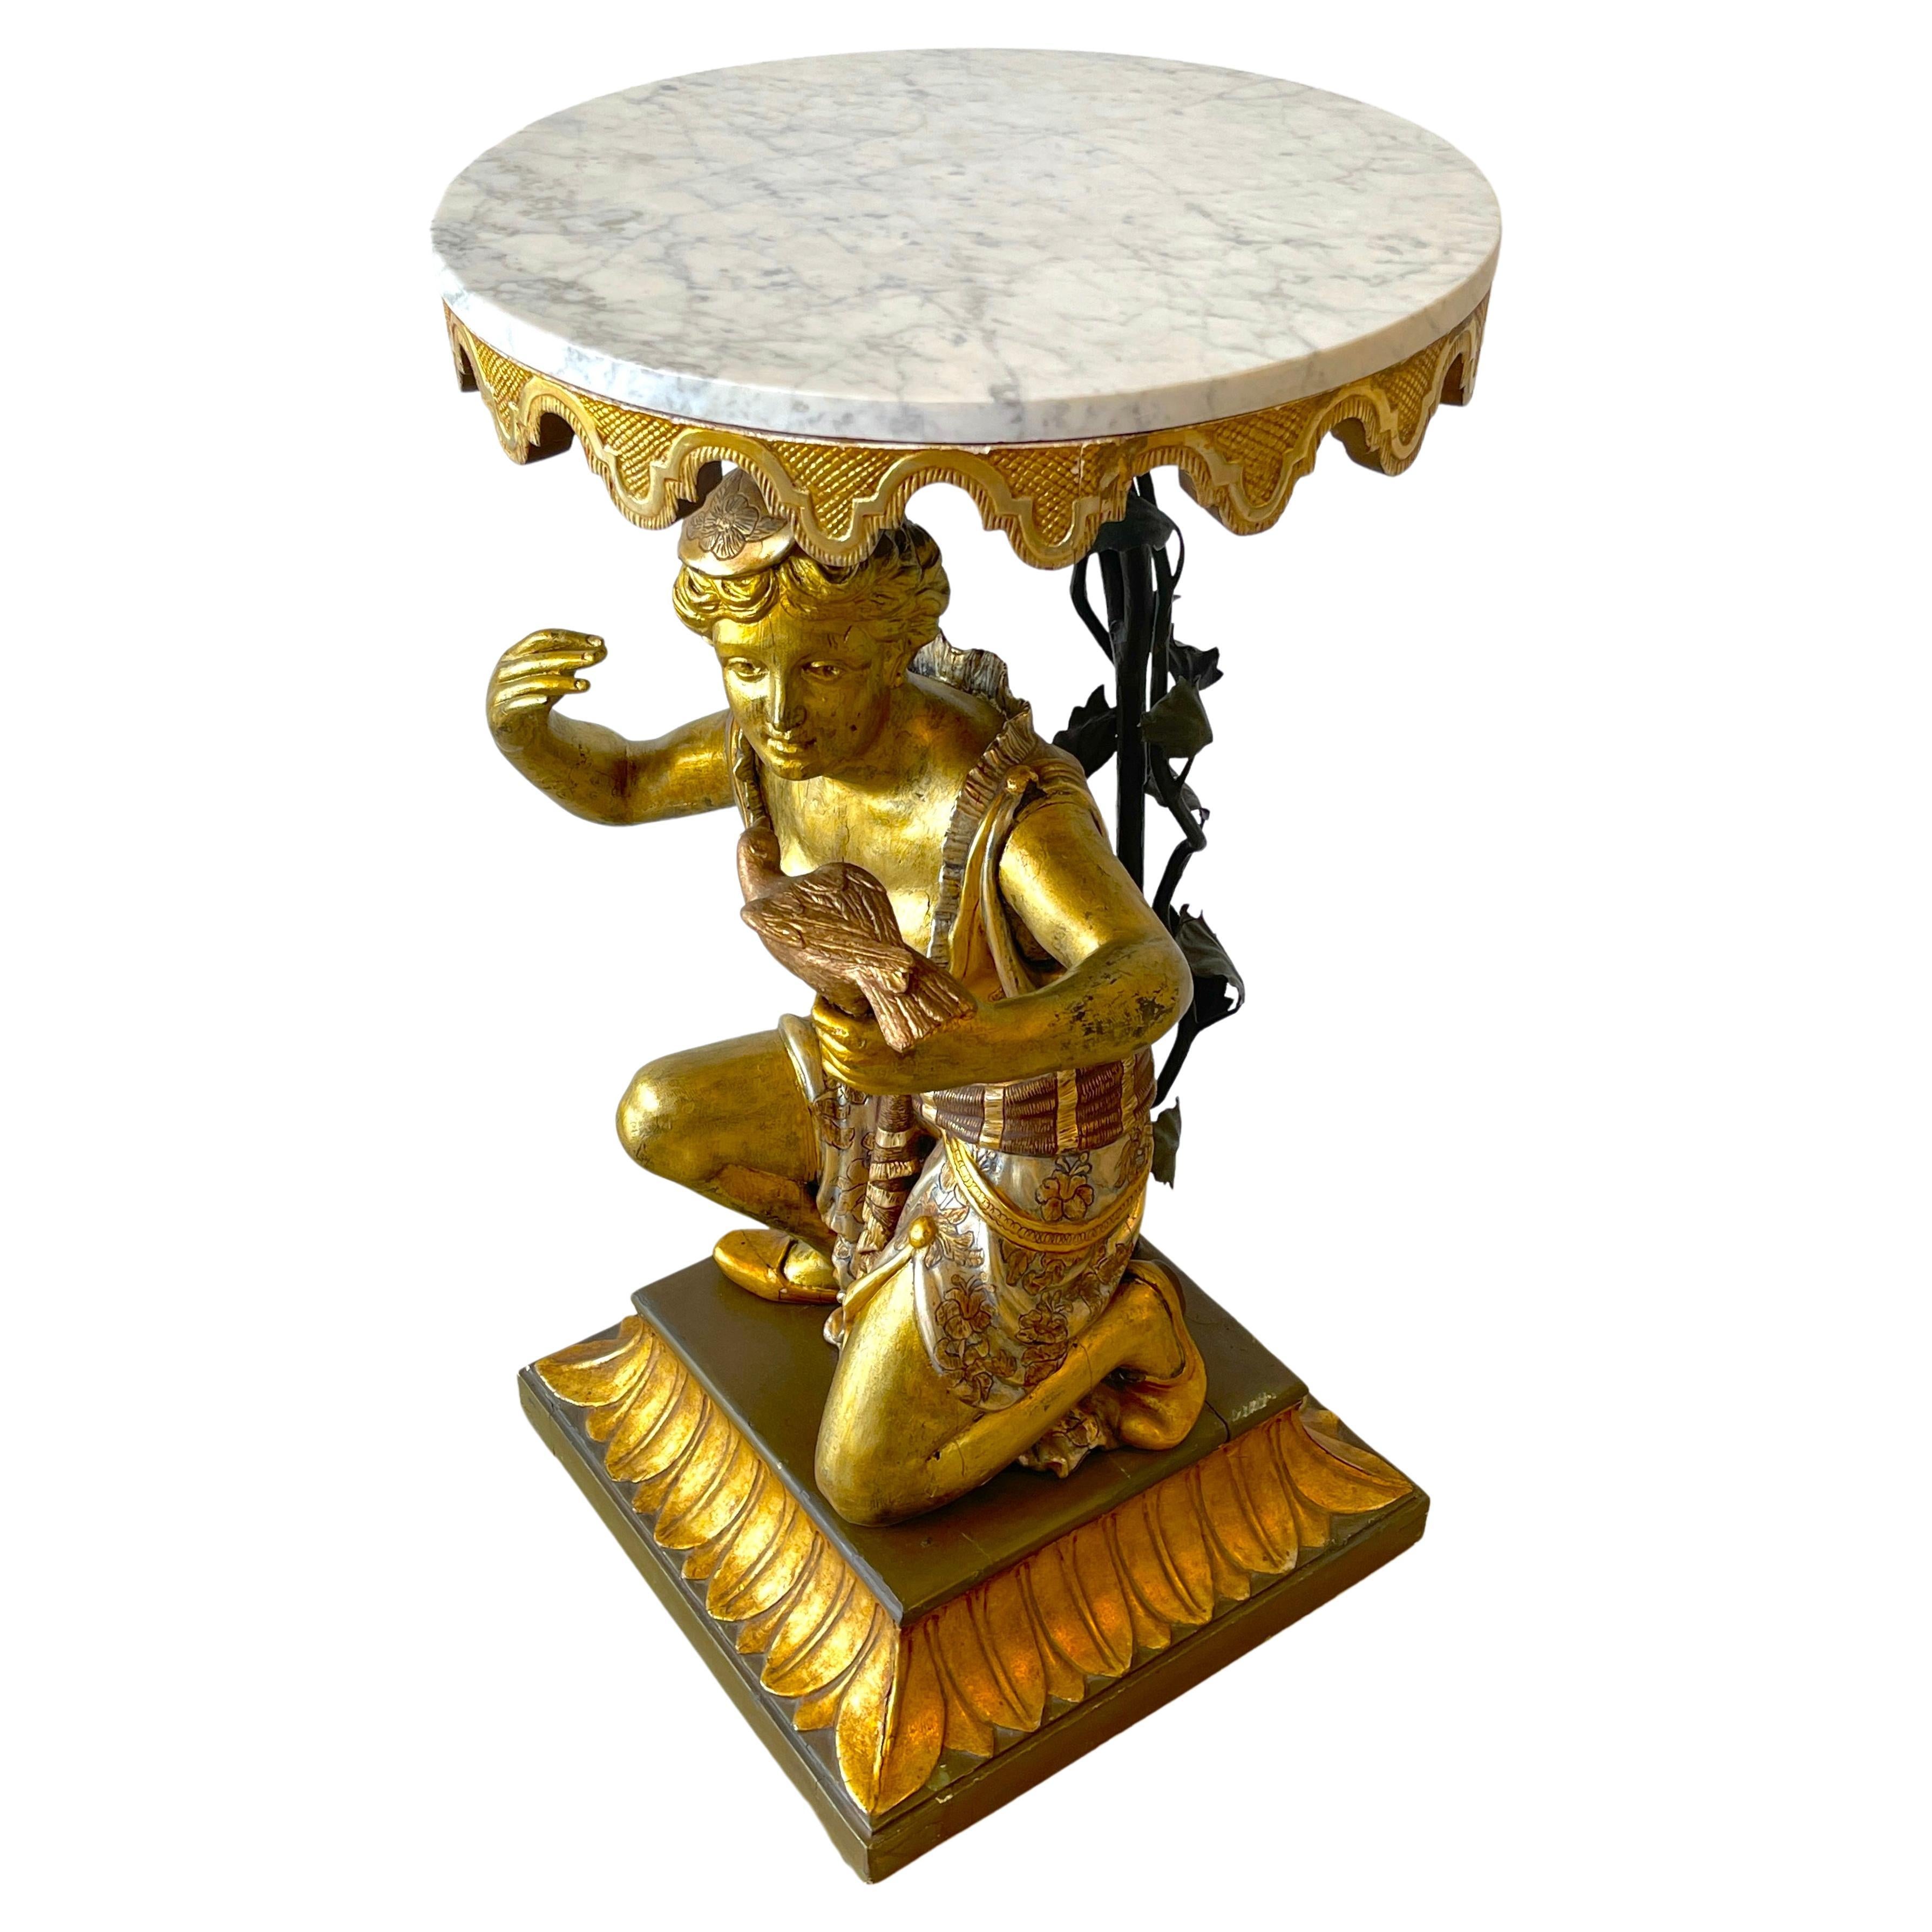 19th C Italian Neoclassical Figural Carved Giltwood & Marble Pedestal / Table